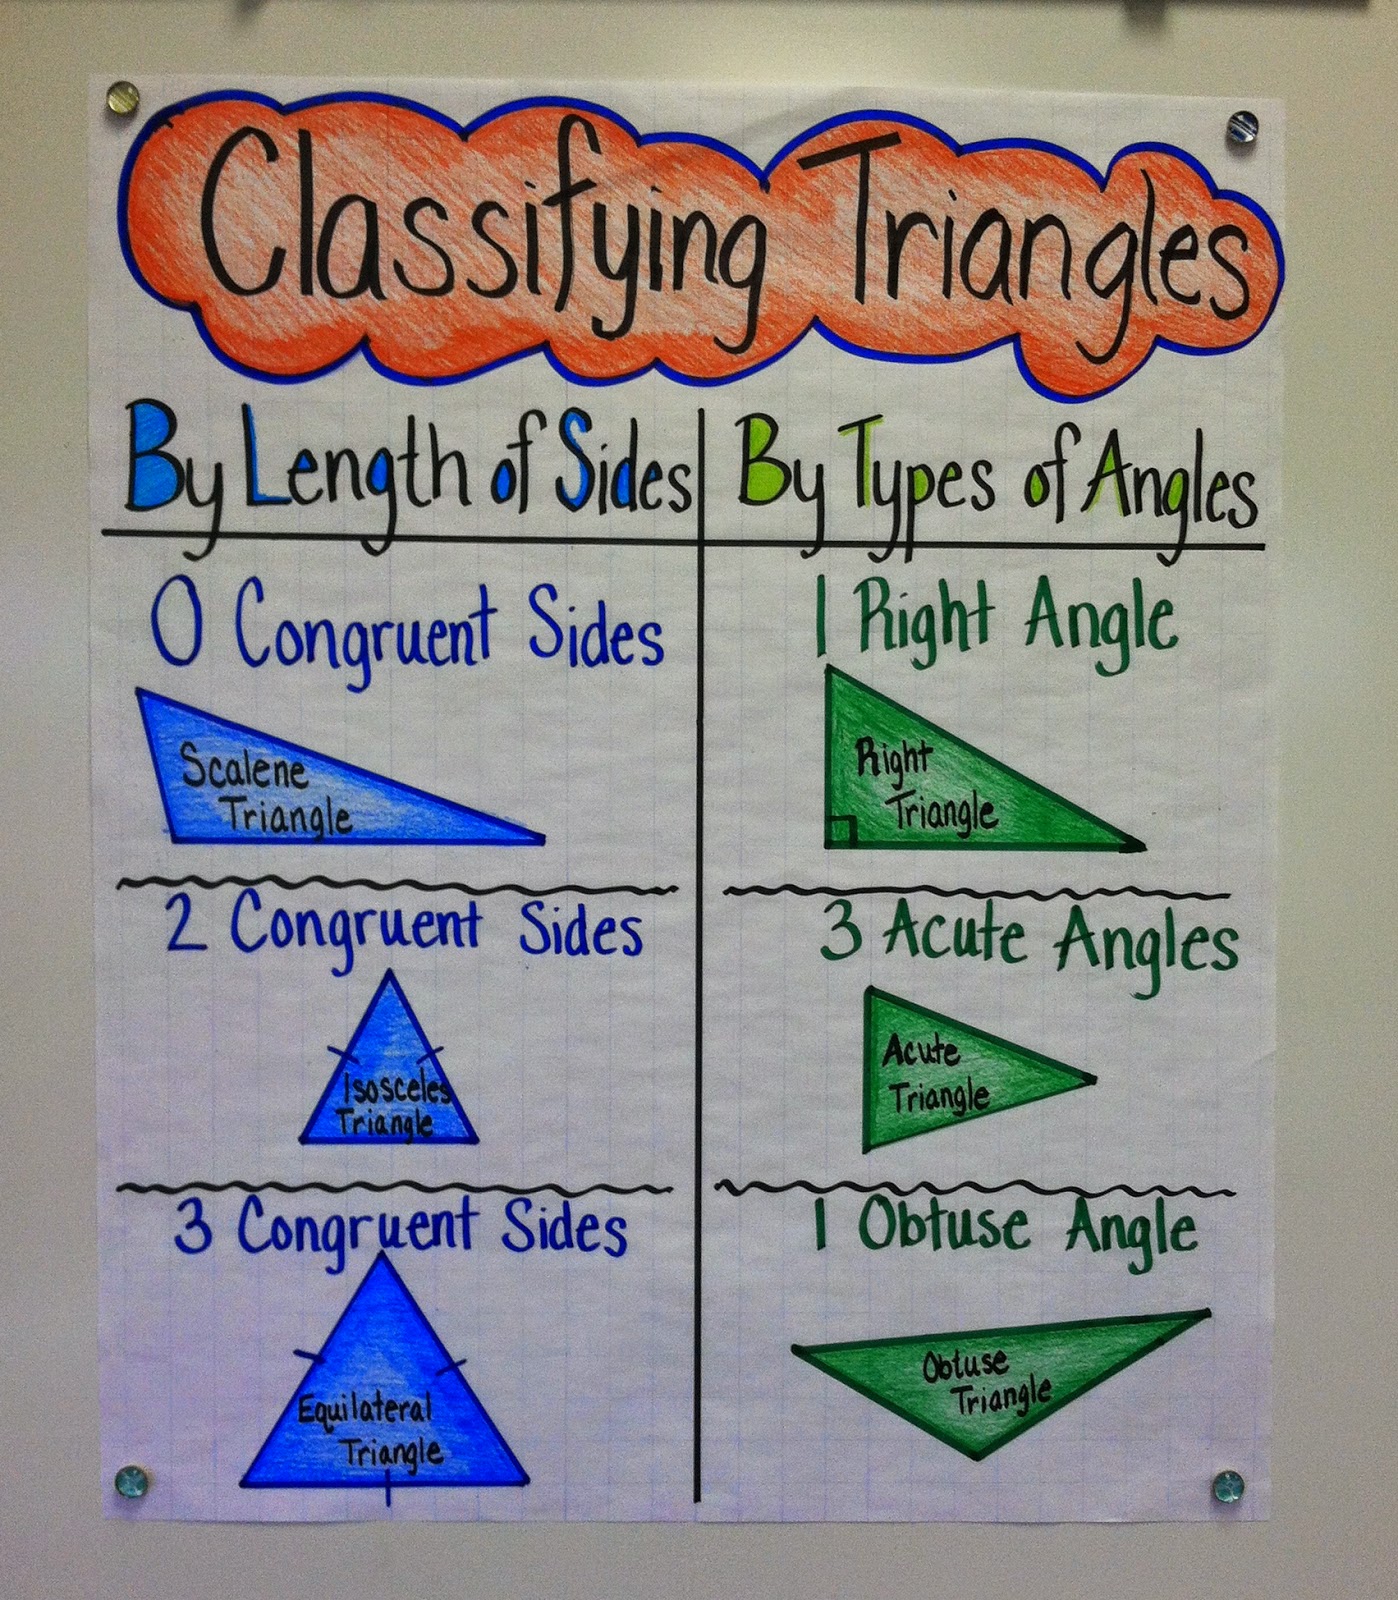 Triangle Classification Made Easy! - Appletastic Learning